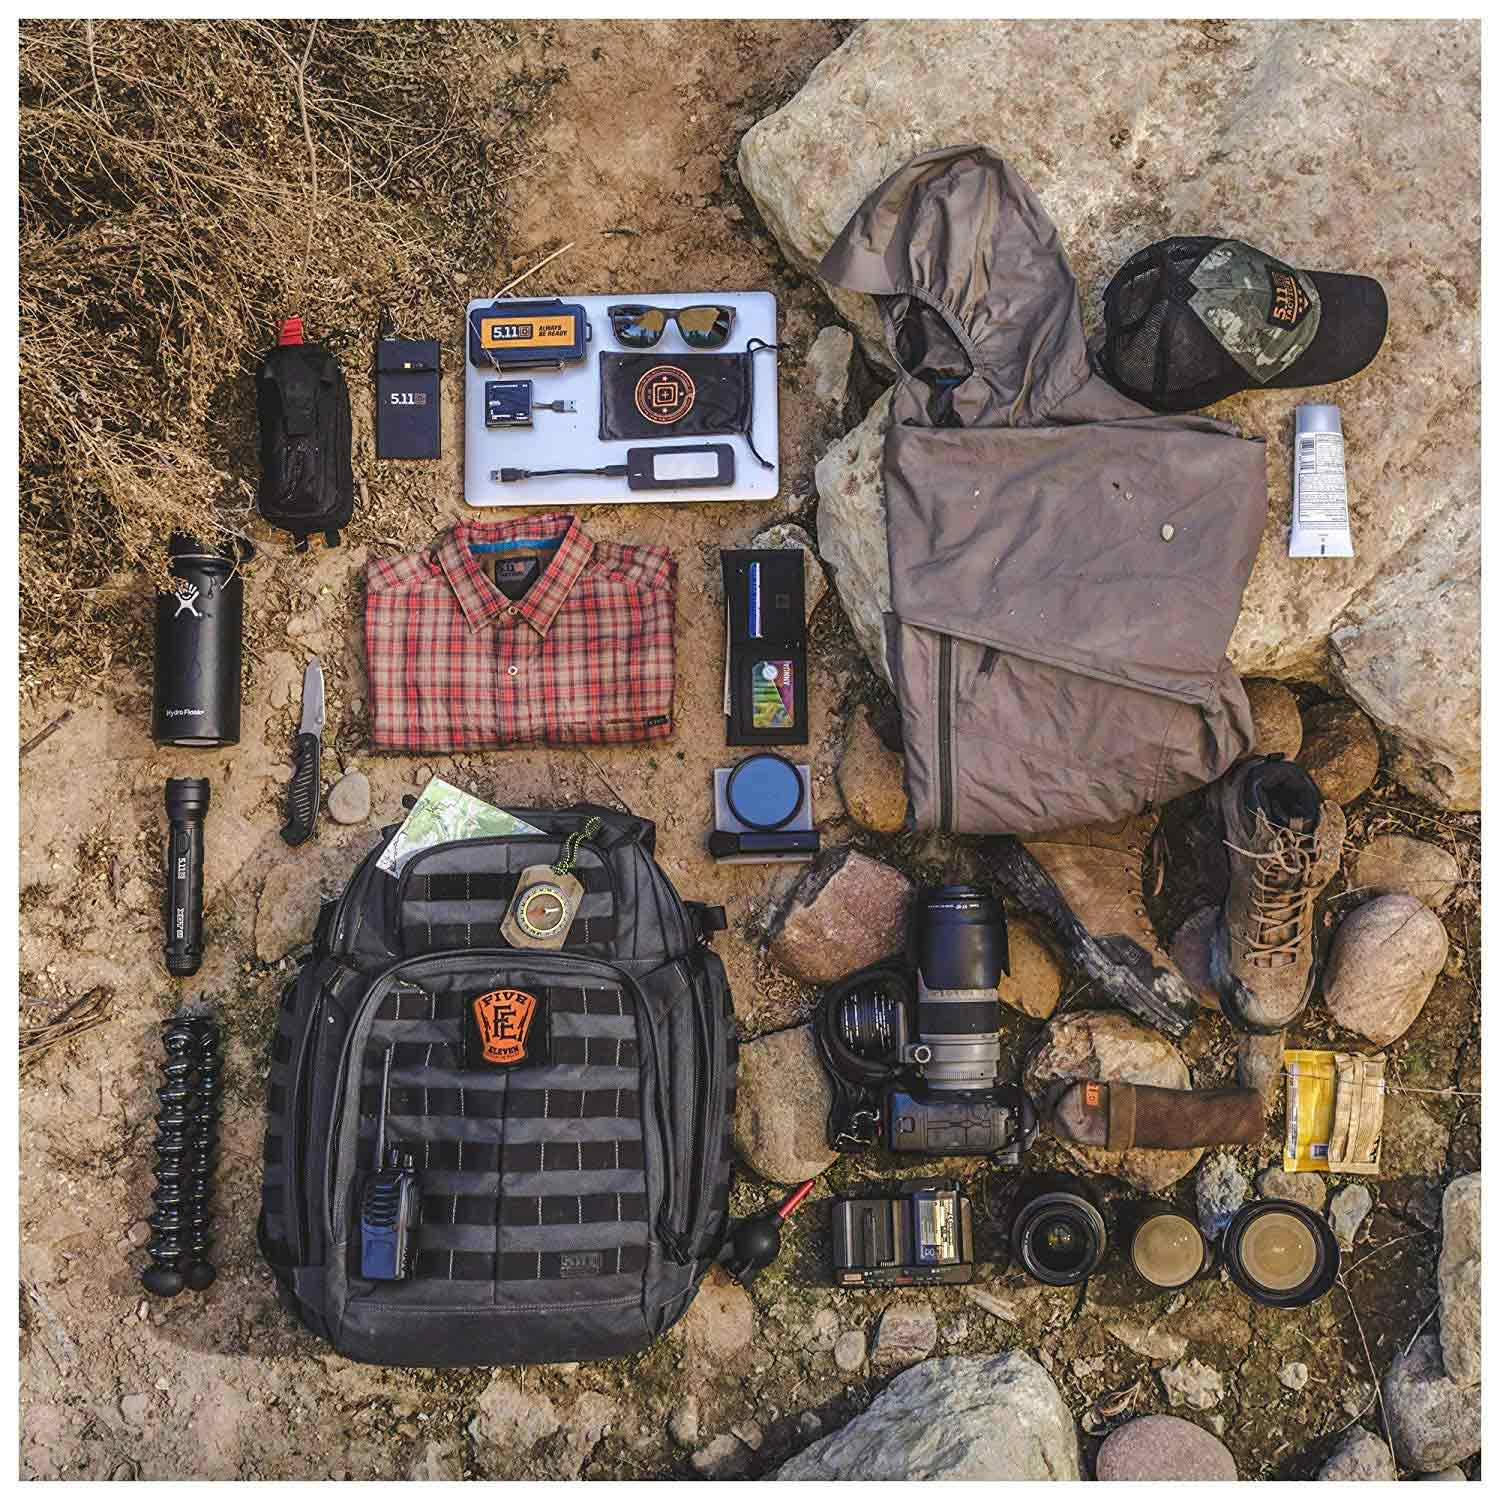 Outdoor supplies and gear